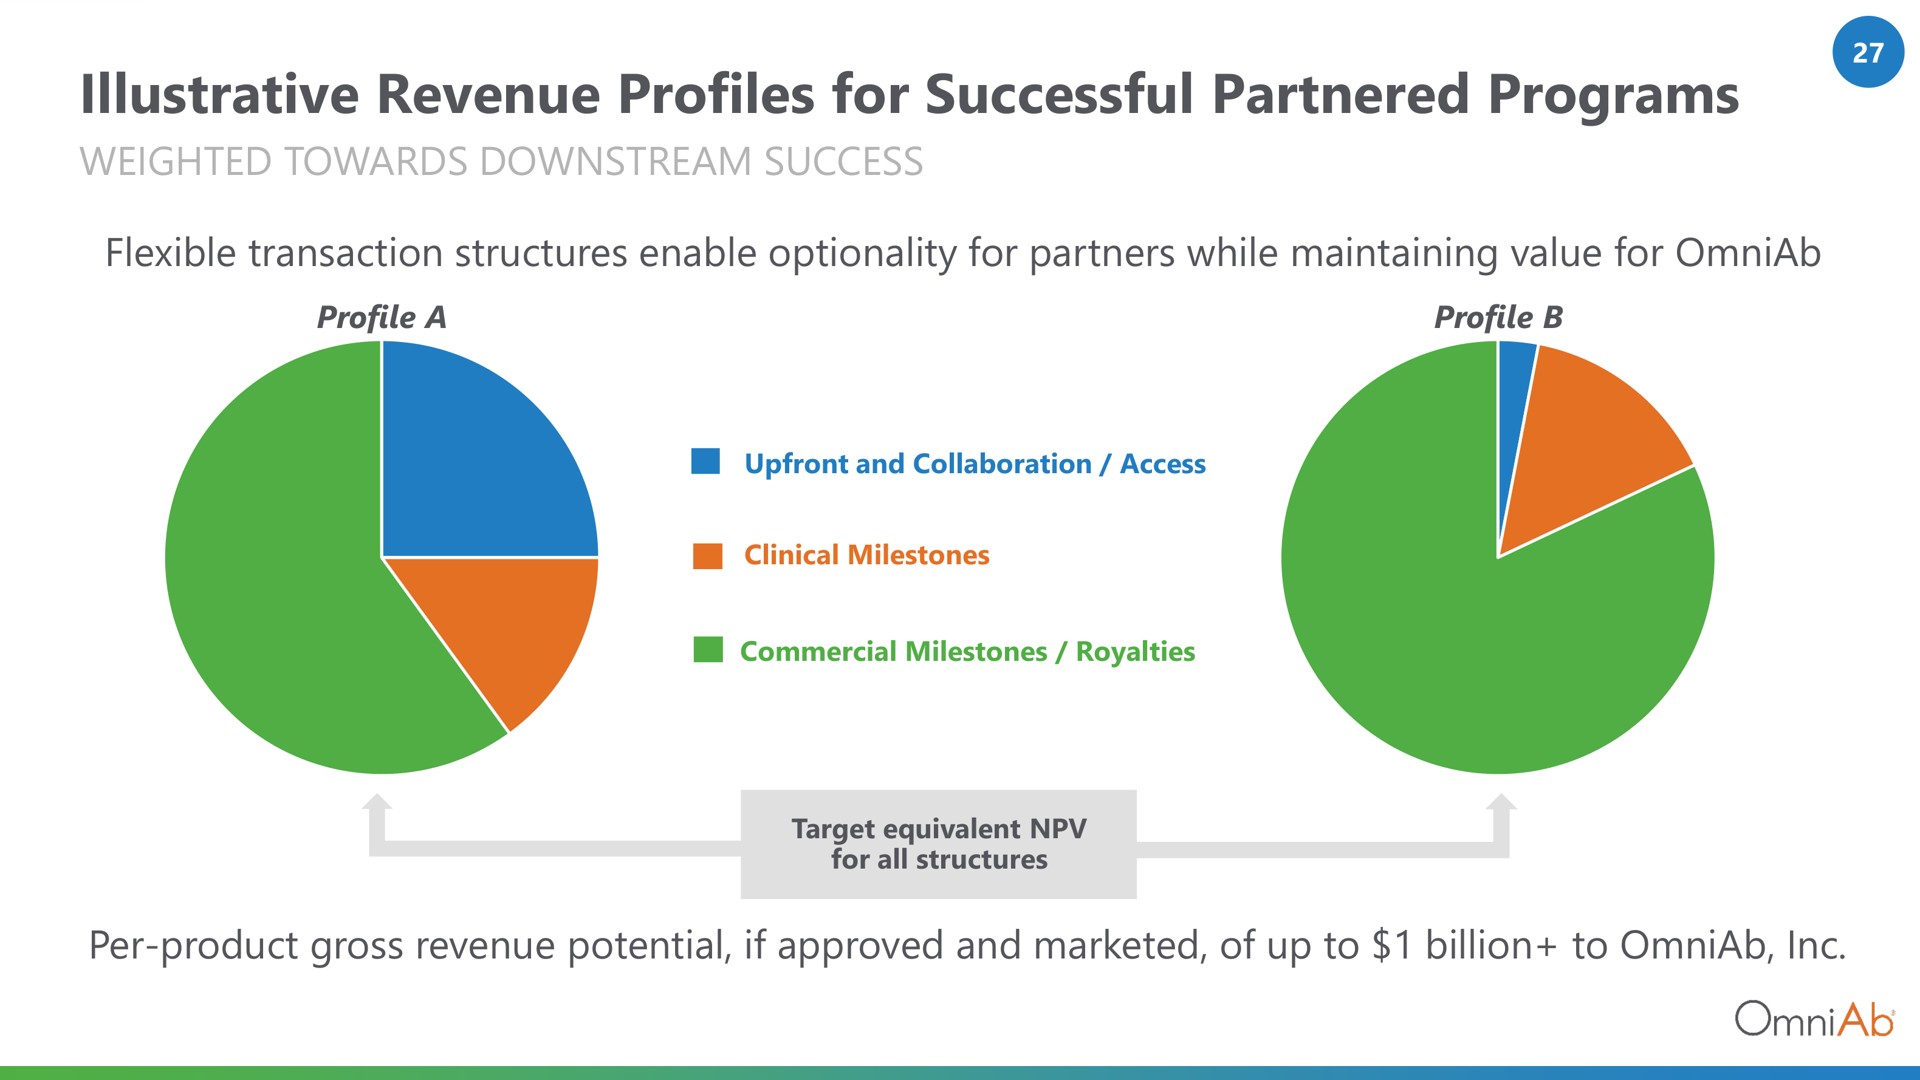 illustrative revenue profiles for successful partnered programs weighted towards downstream success | OmniAb